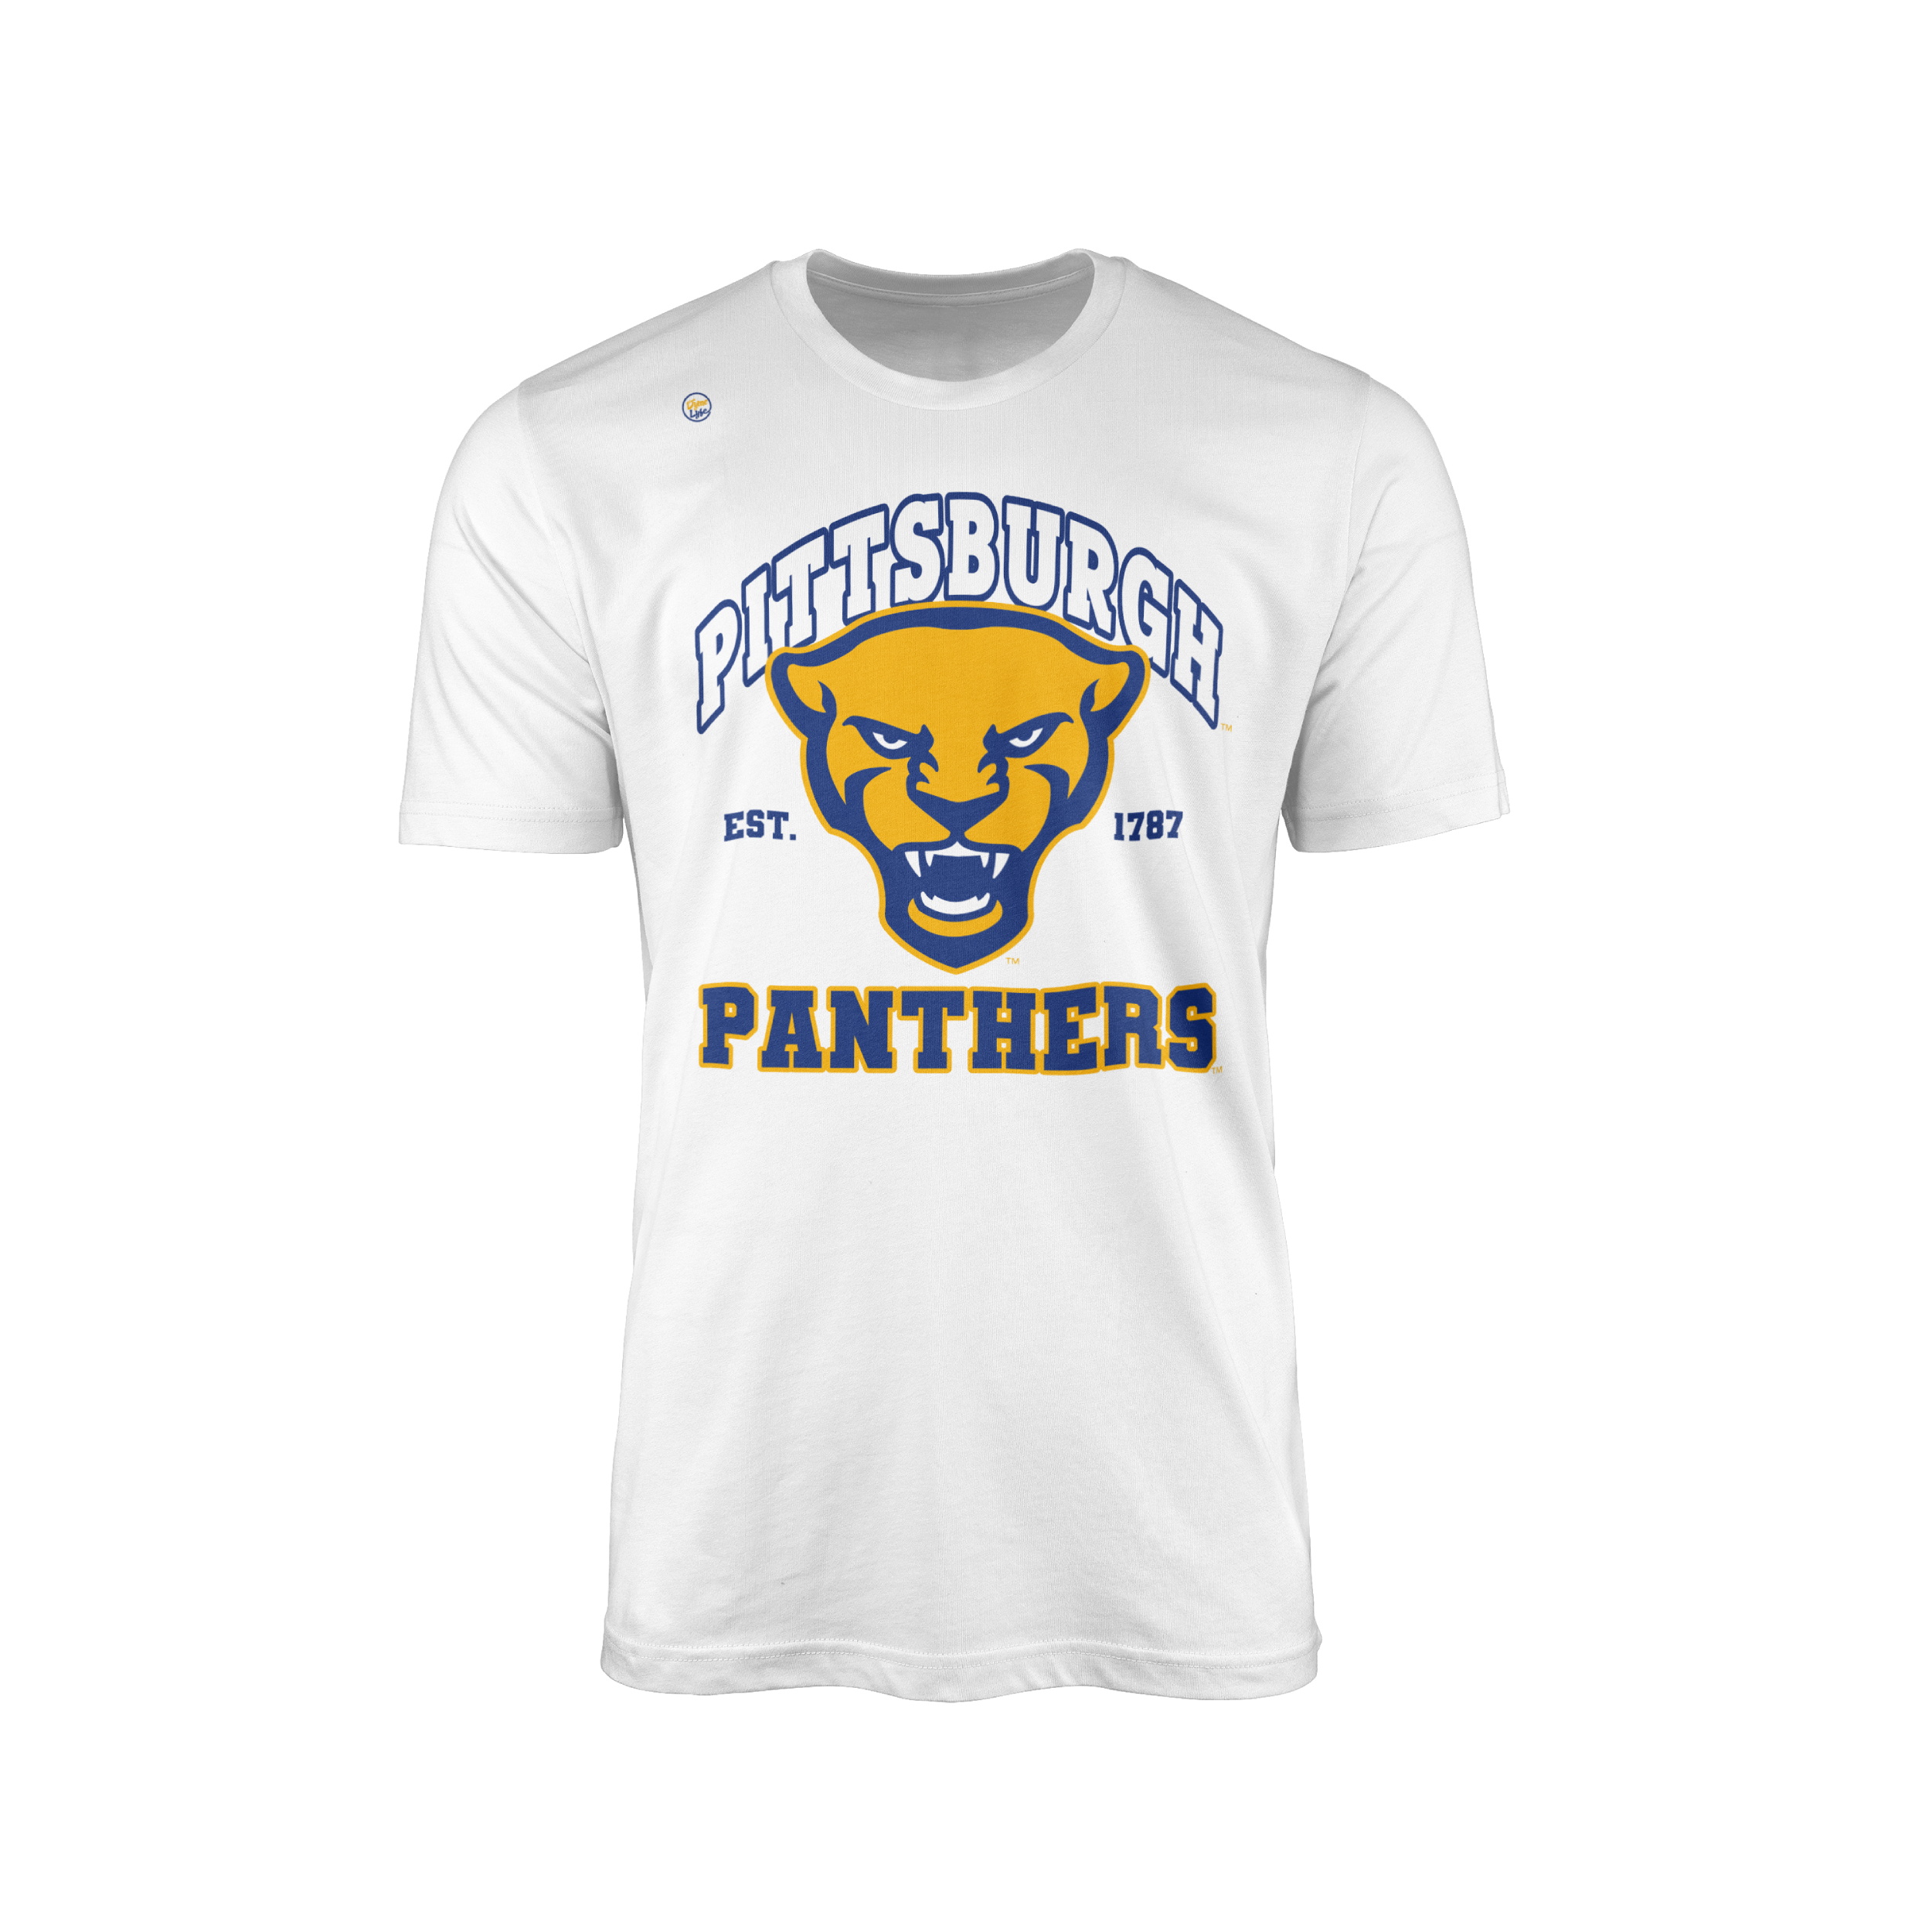 Pittsburgh Panthers Men’s Est. Tee